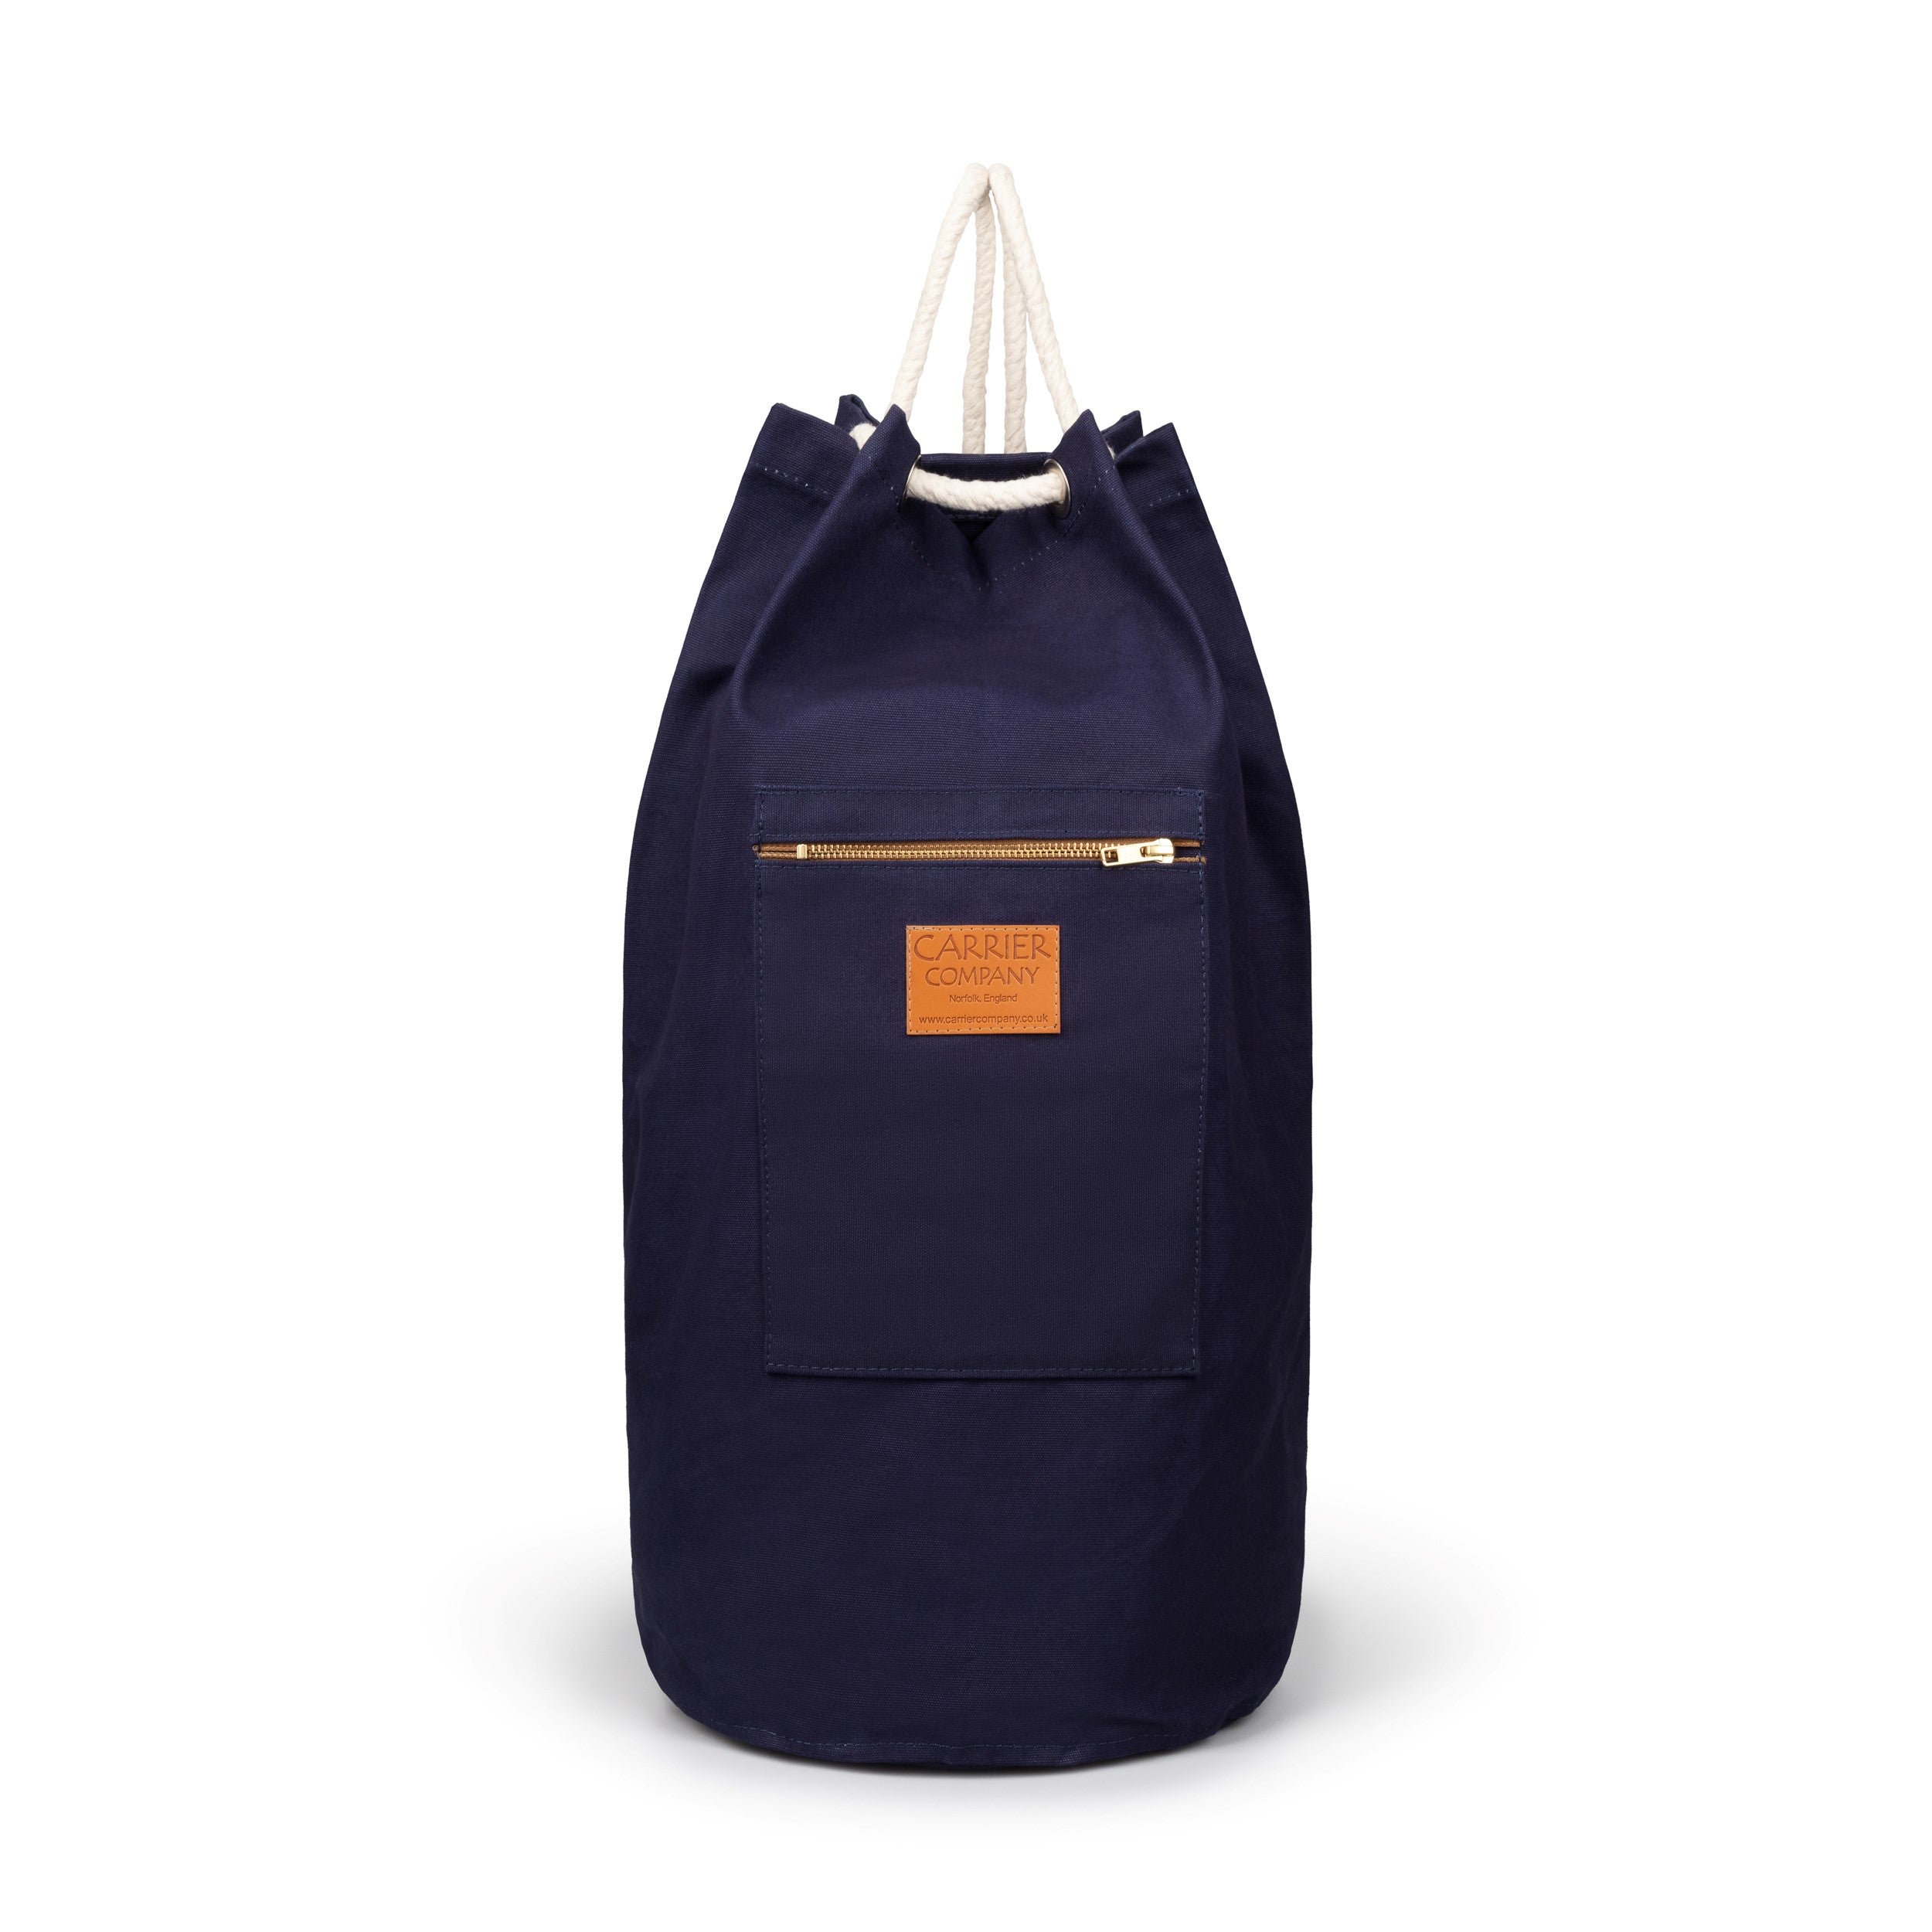 Carrier Company Duffle Bag in Navy